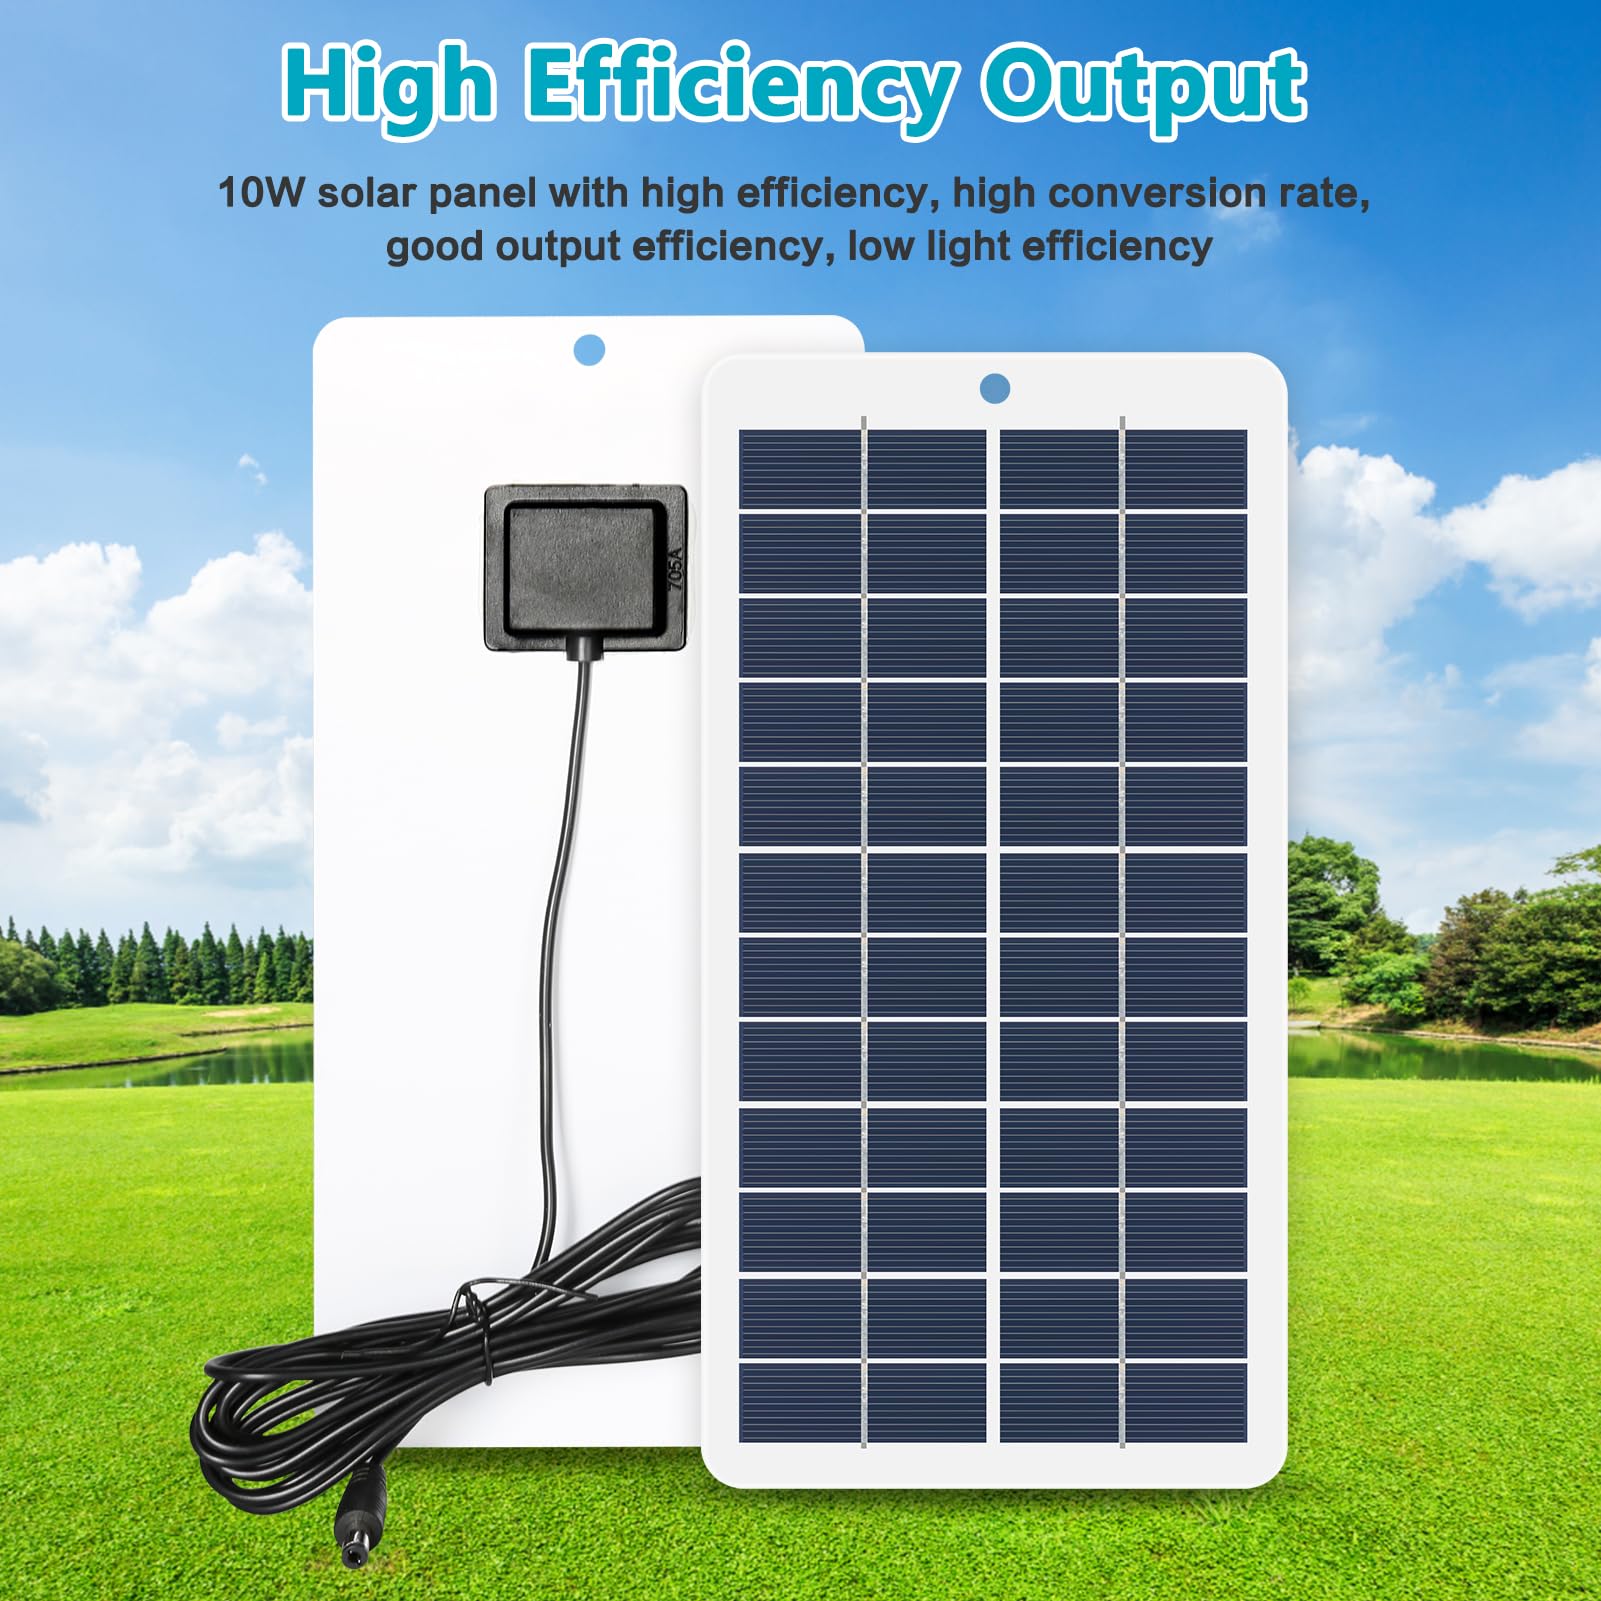 Maxmartt Portable Solar Panel Charger Kits 10W 12V Solar Battery Trickle Charger Maintainer Solar Cells Battery Charger DC Connector for Outdoor Lights Camping